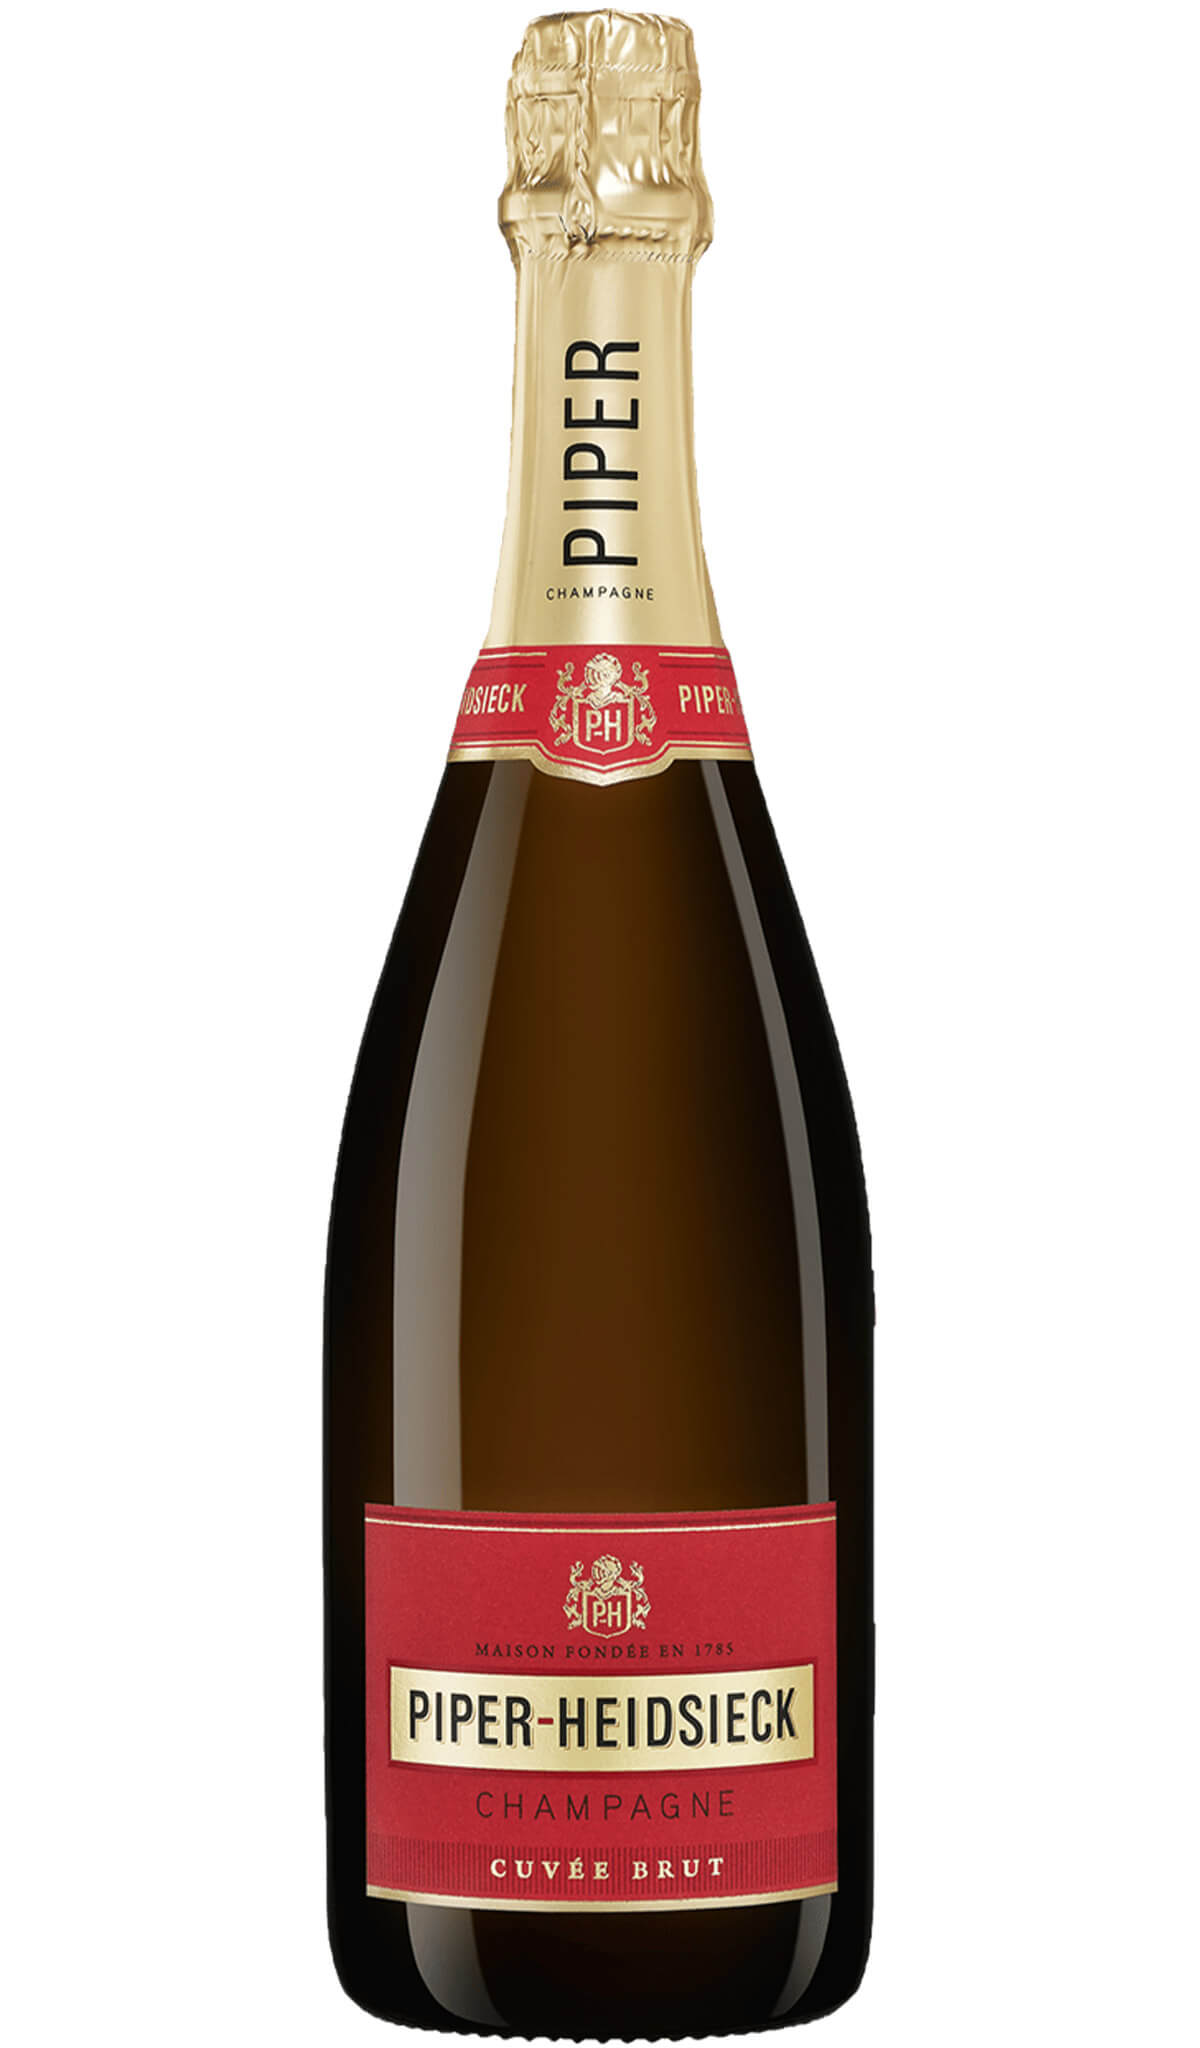 Find out more or buy Piper Heidsieck Champagne Cuvée Brut NV 750ml online at Wine Sellers Direct - Australia’s independent liquor specialists.